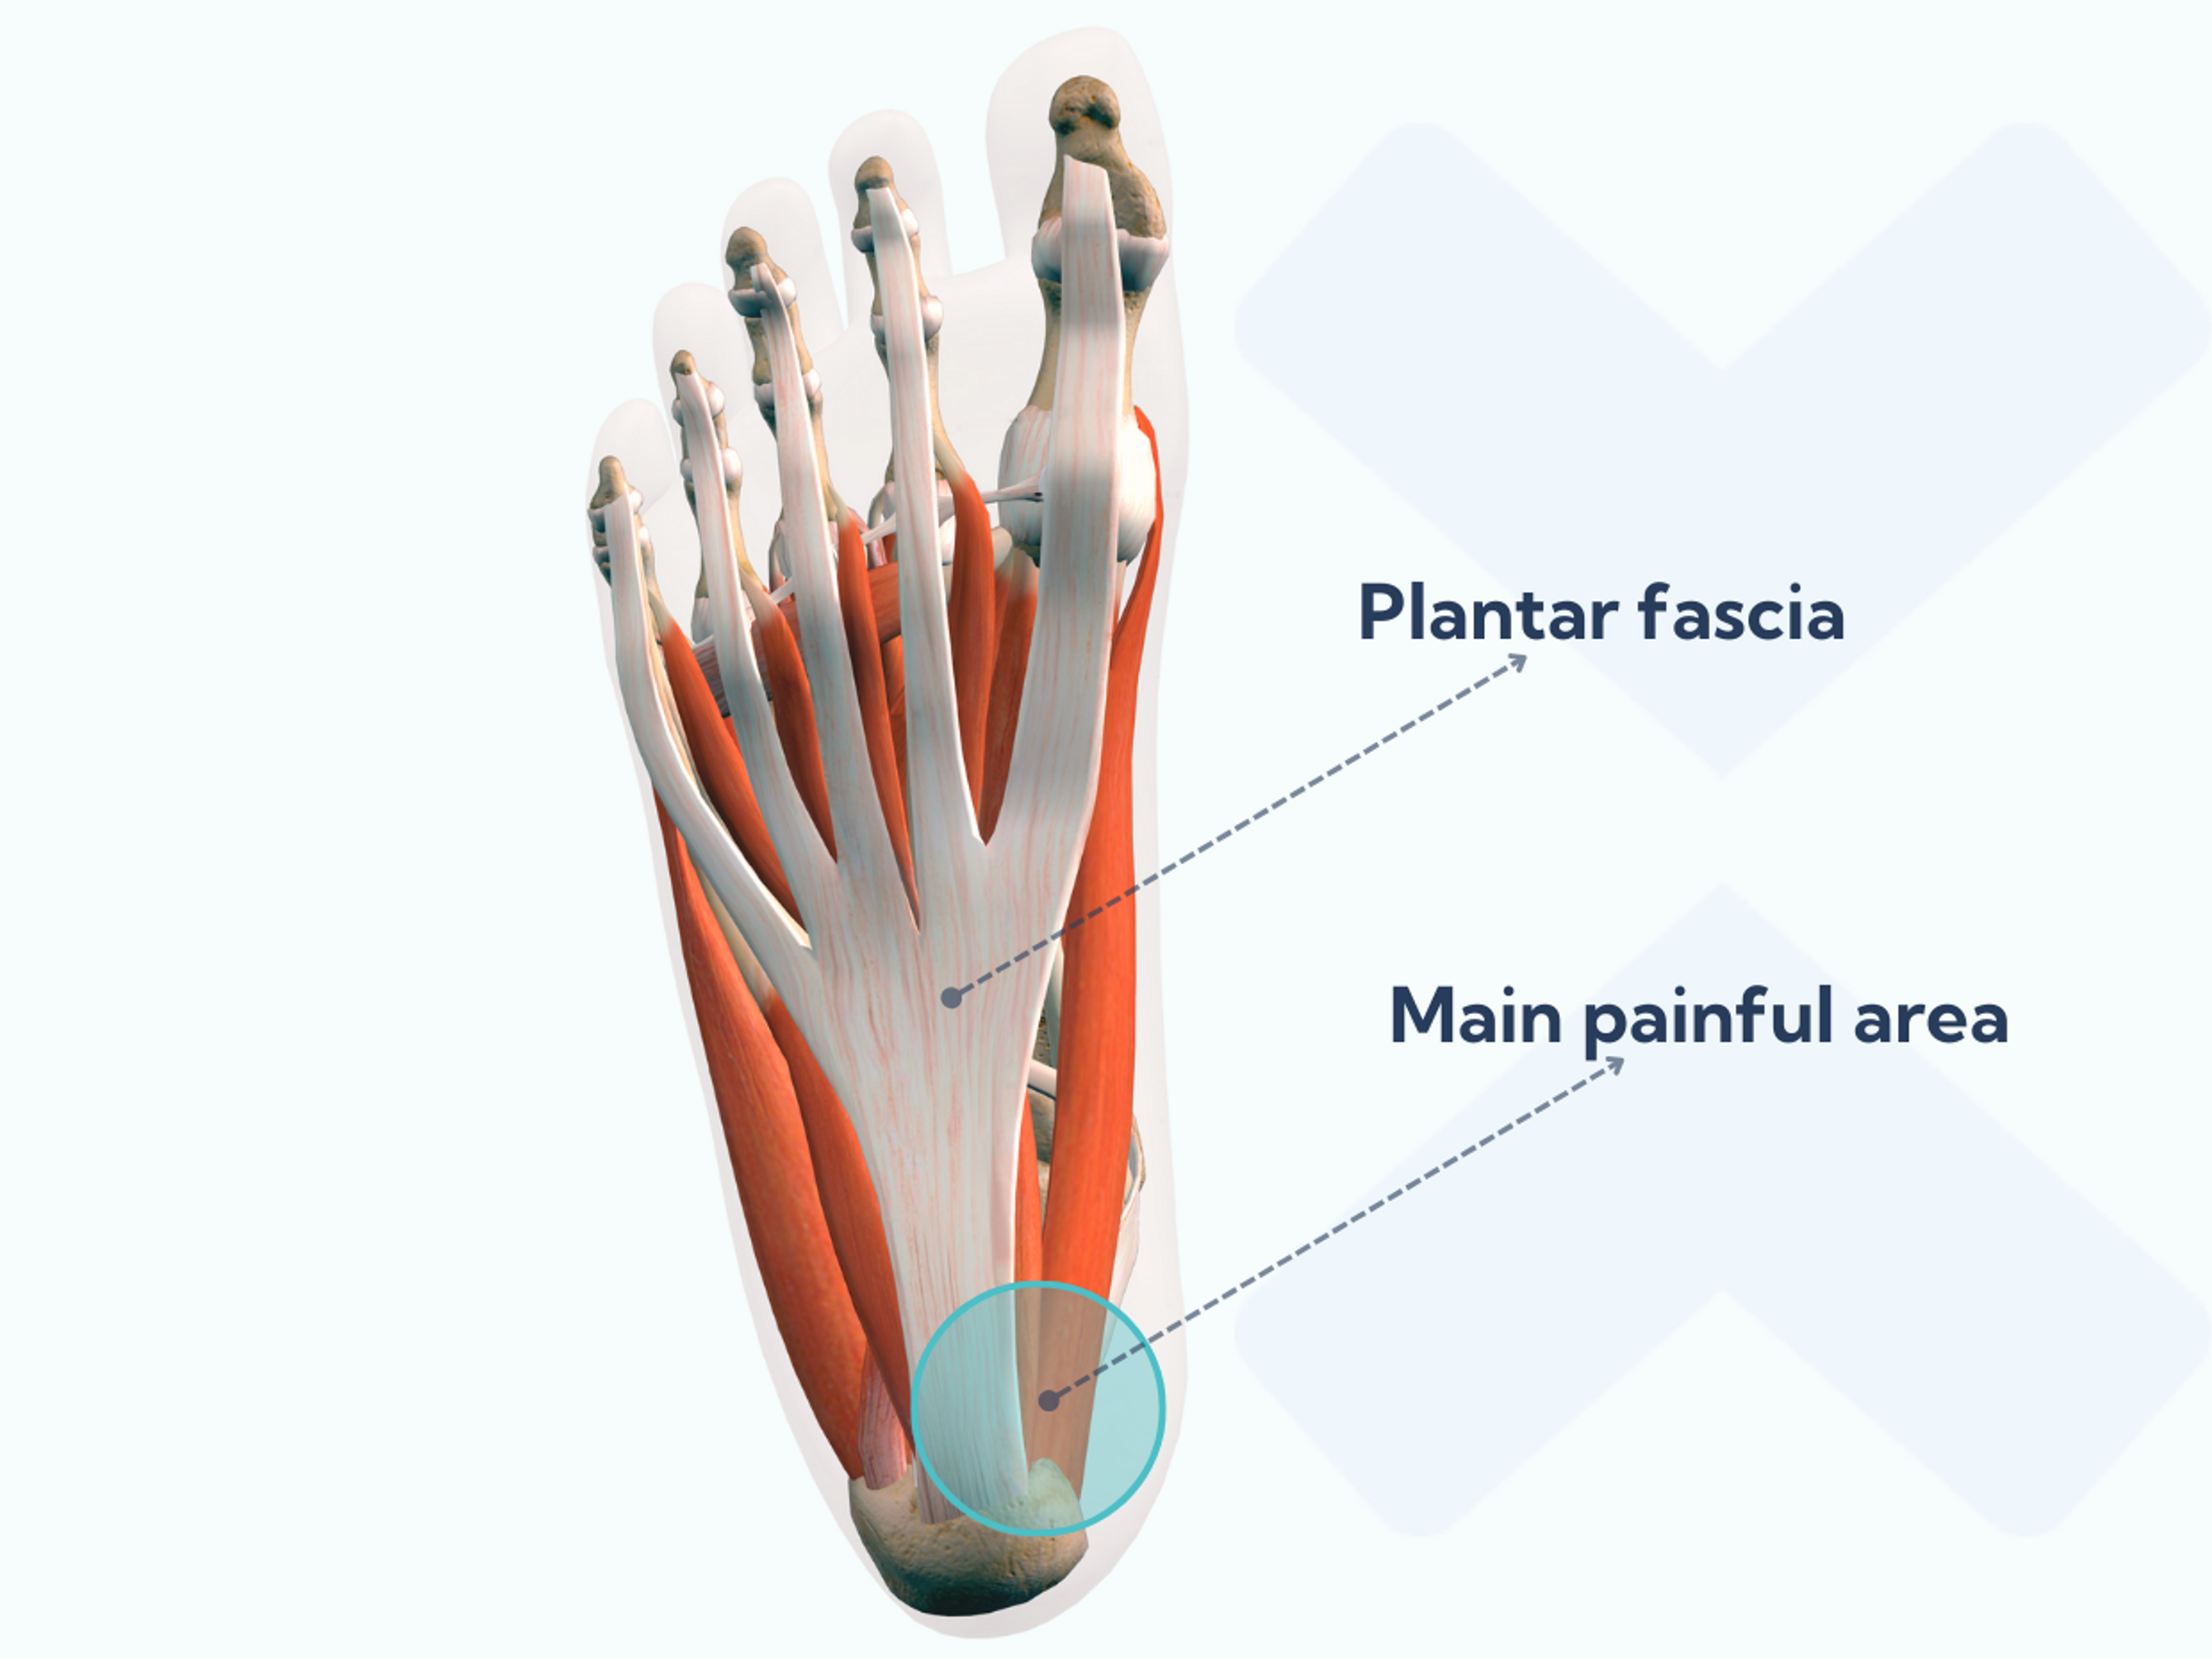 The diagnosis of plantar fasciitis suggests an injury to the plantar fascia.